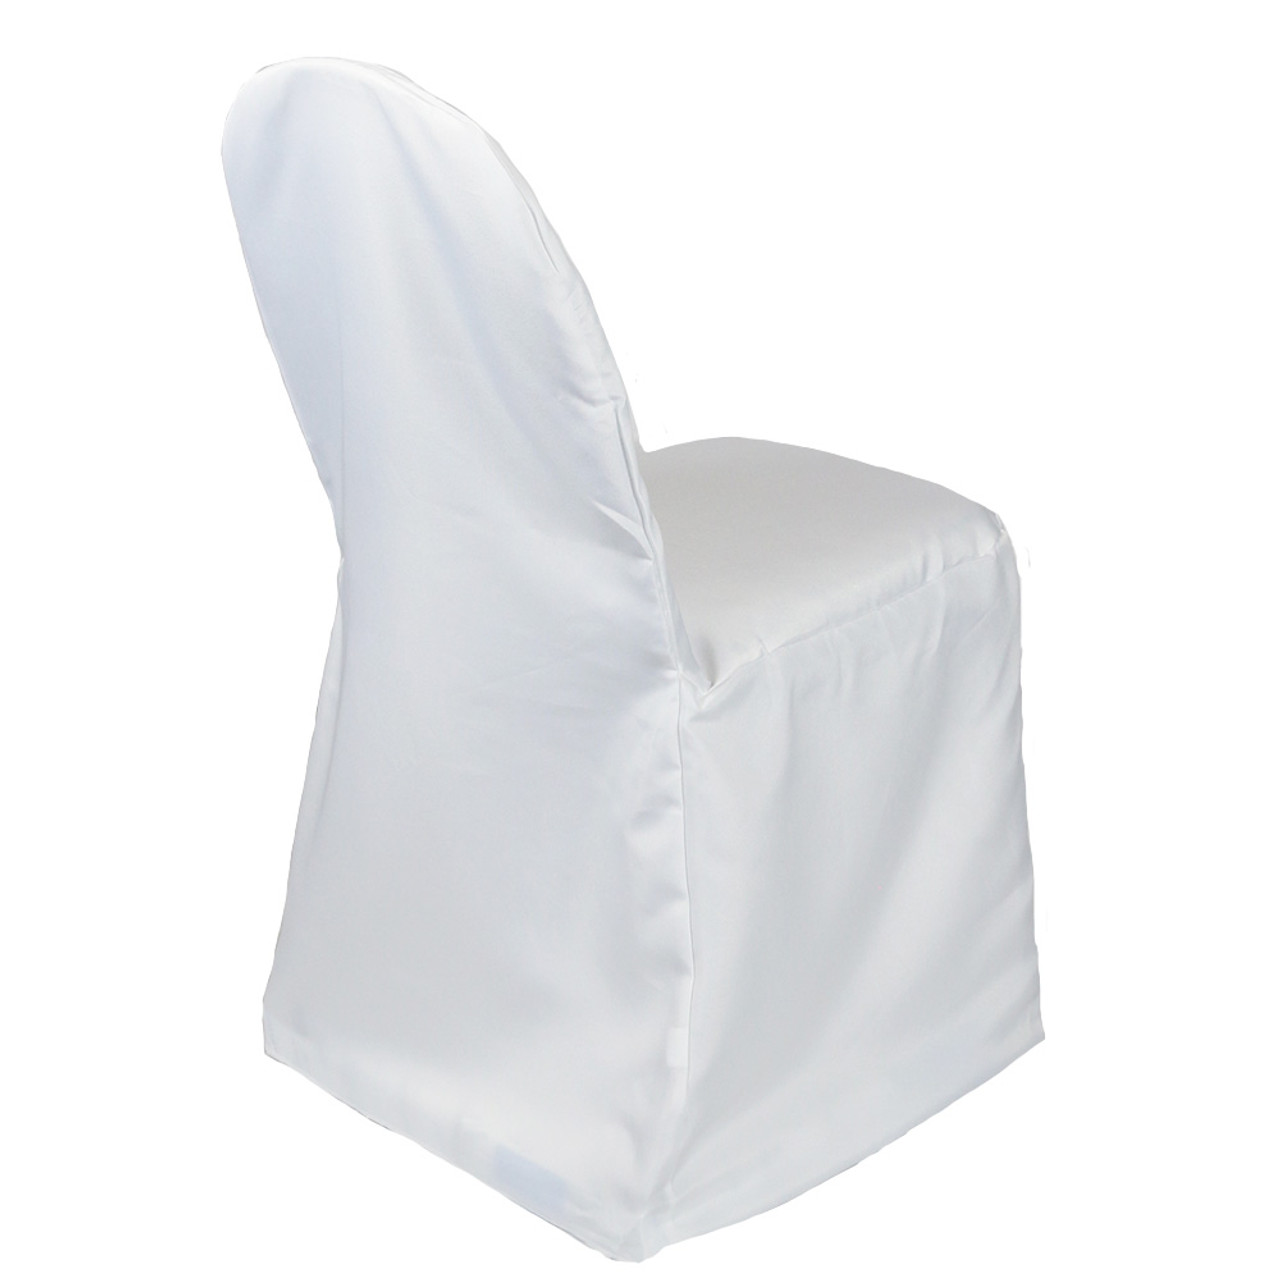 https://cdn11.bigcommerce.com/s-bch7e9/images/stencil/1280x1280/products/306/8308/polyester-banquet-chair-cover-white-3__46281.1580326021.jpg?c=2